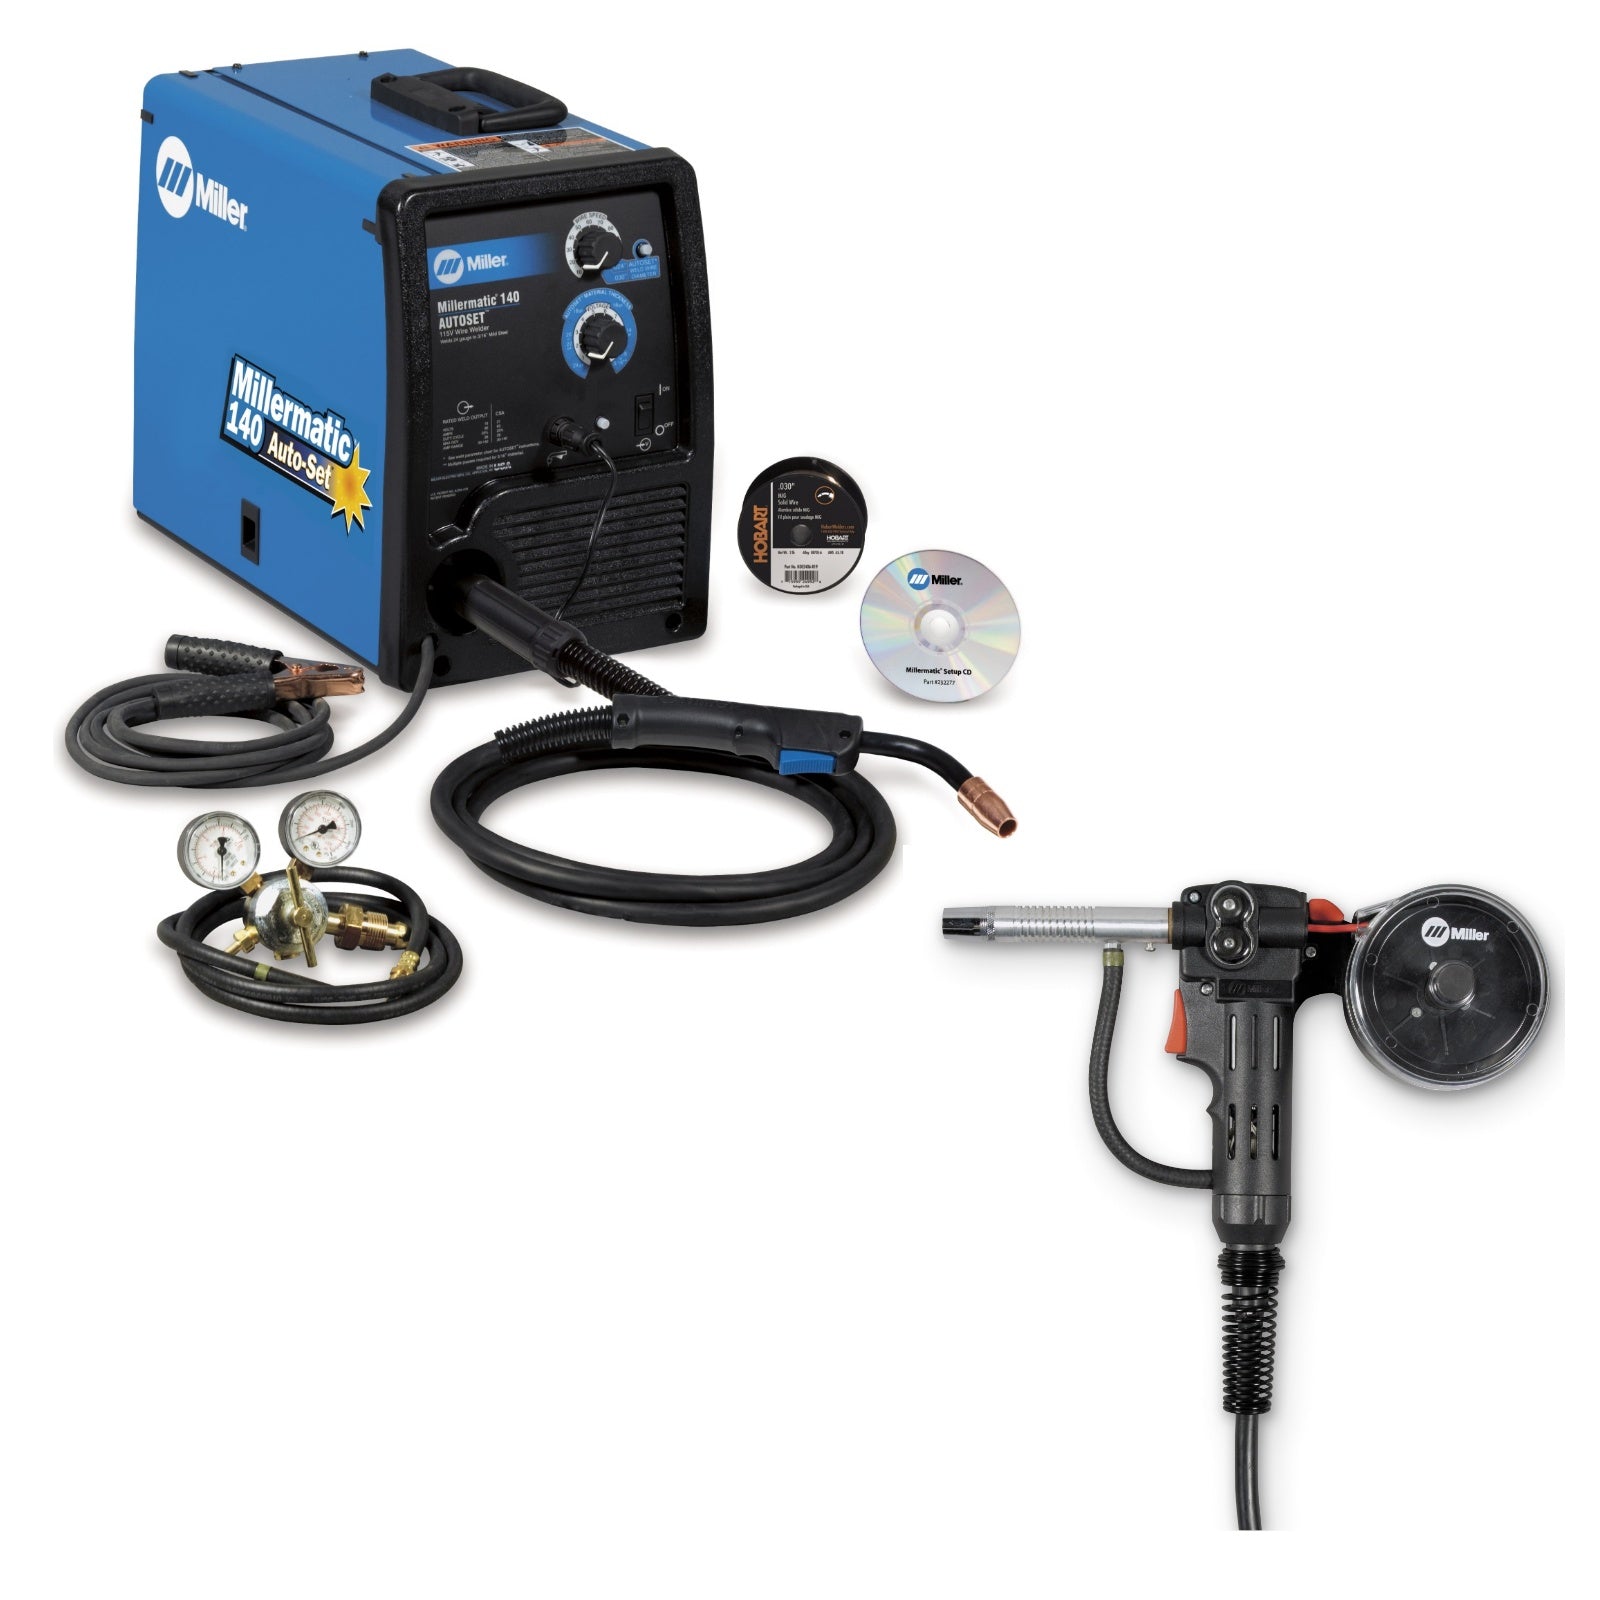 Miller Millermatic 140 MIG Pkg with Auto-Set and Spoolmate 100 (907335)